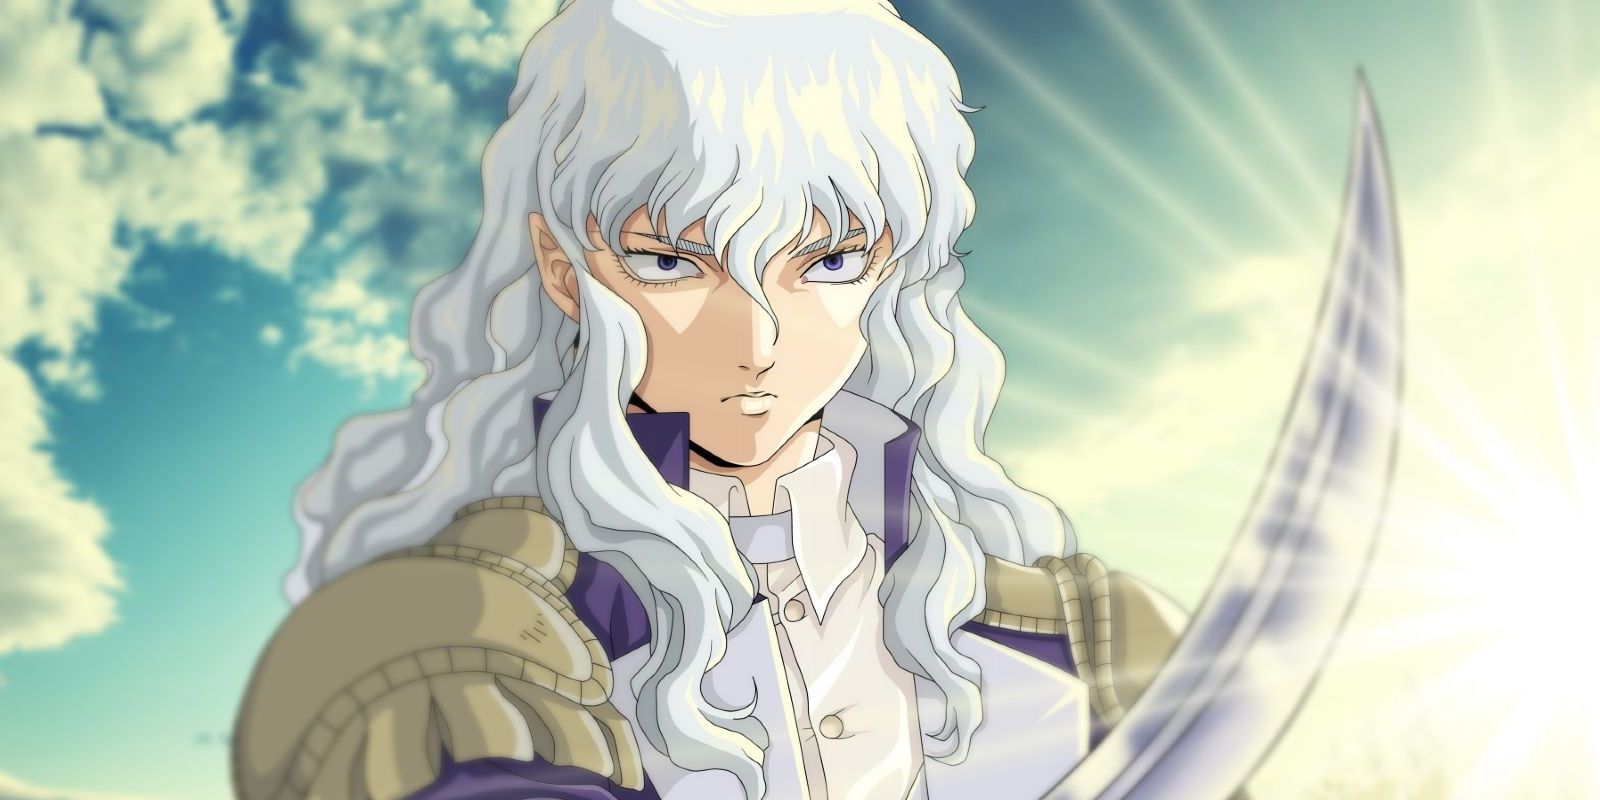 Griffith using his sword to fight